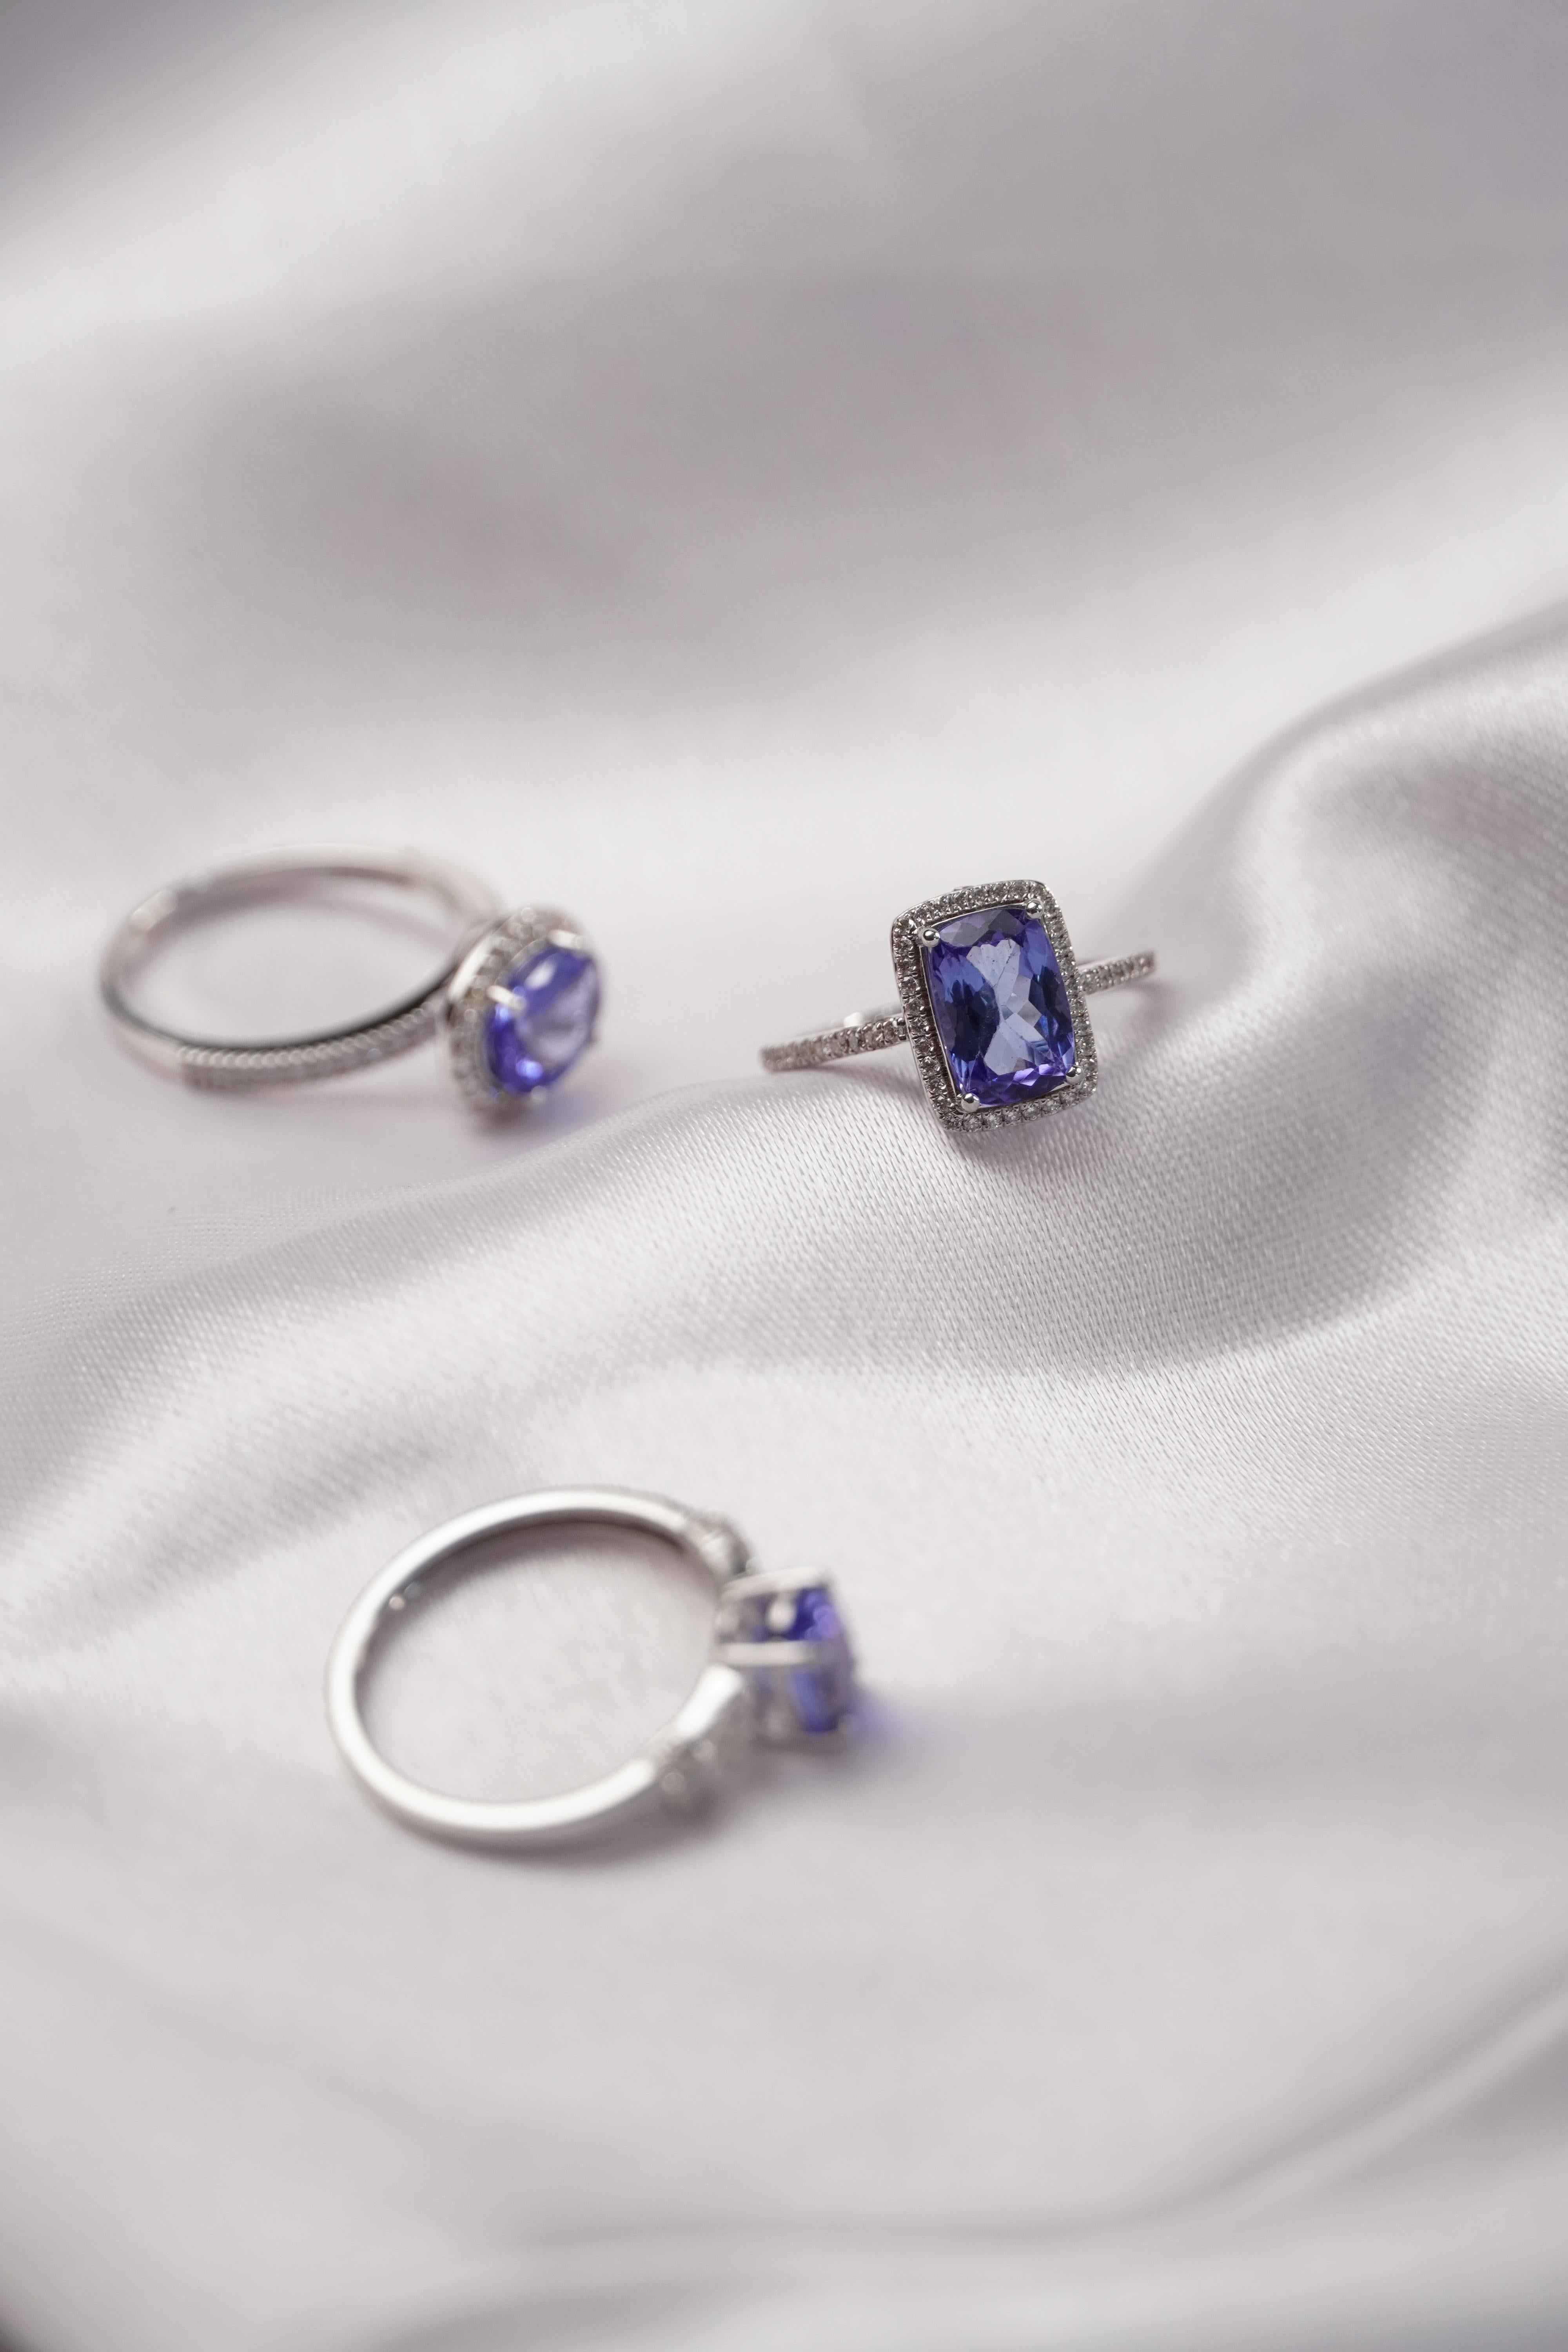 For Sale:  1.76 Carat Tanzanite and Diamond Ring in 18K White Gold 4